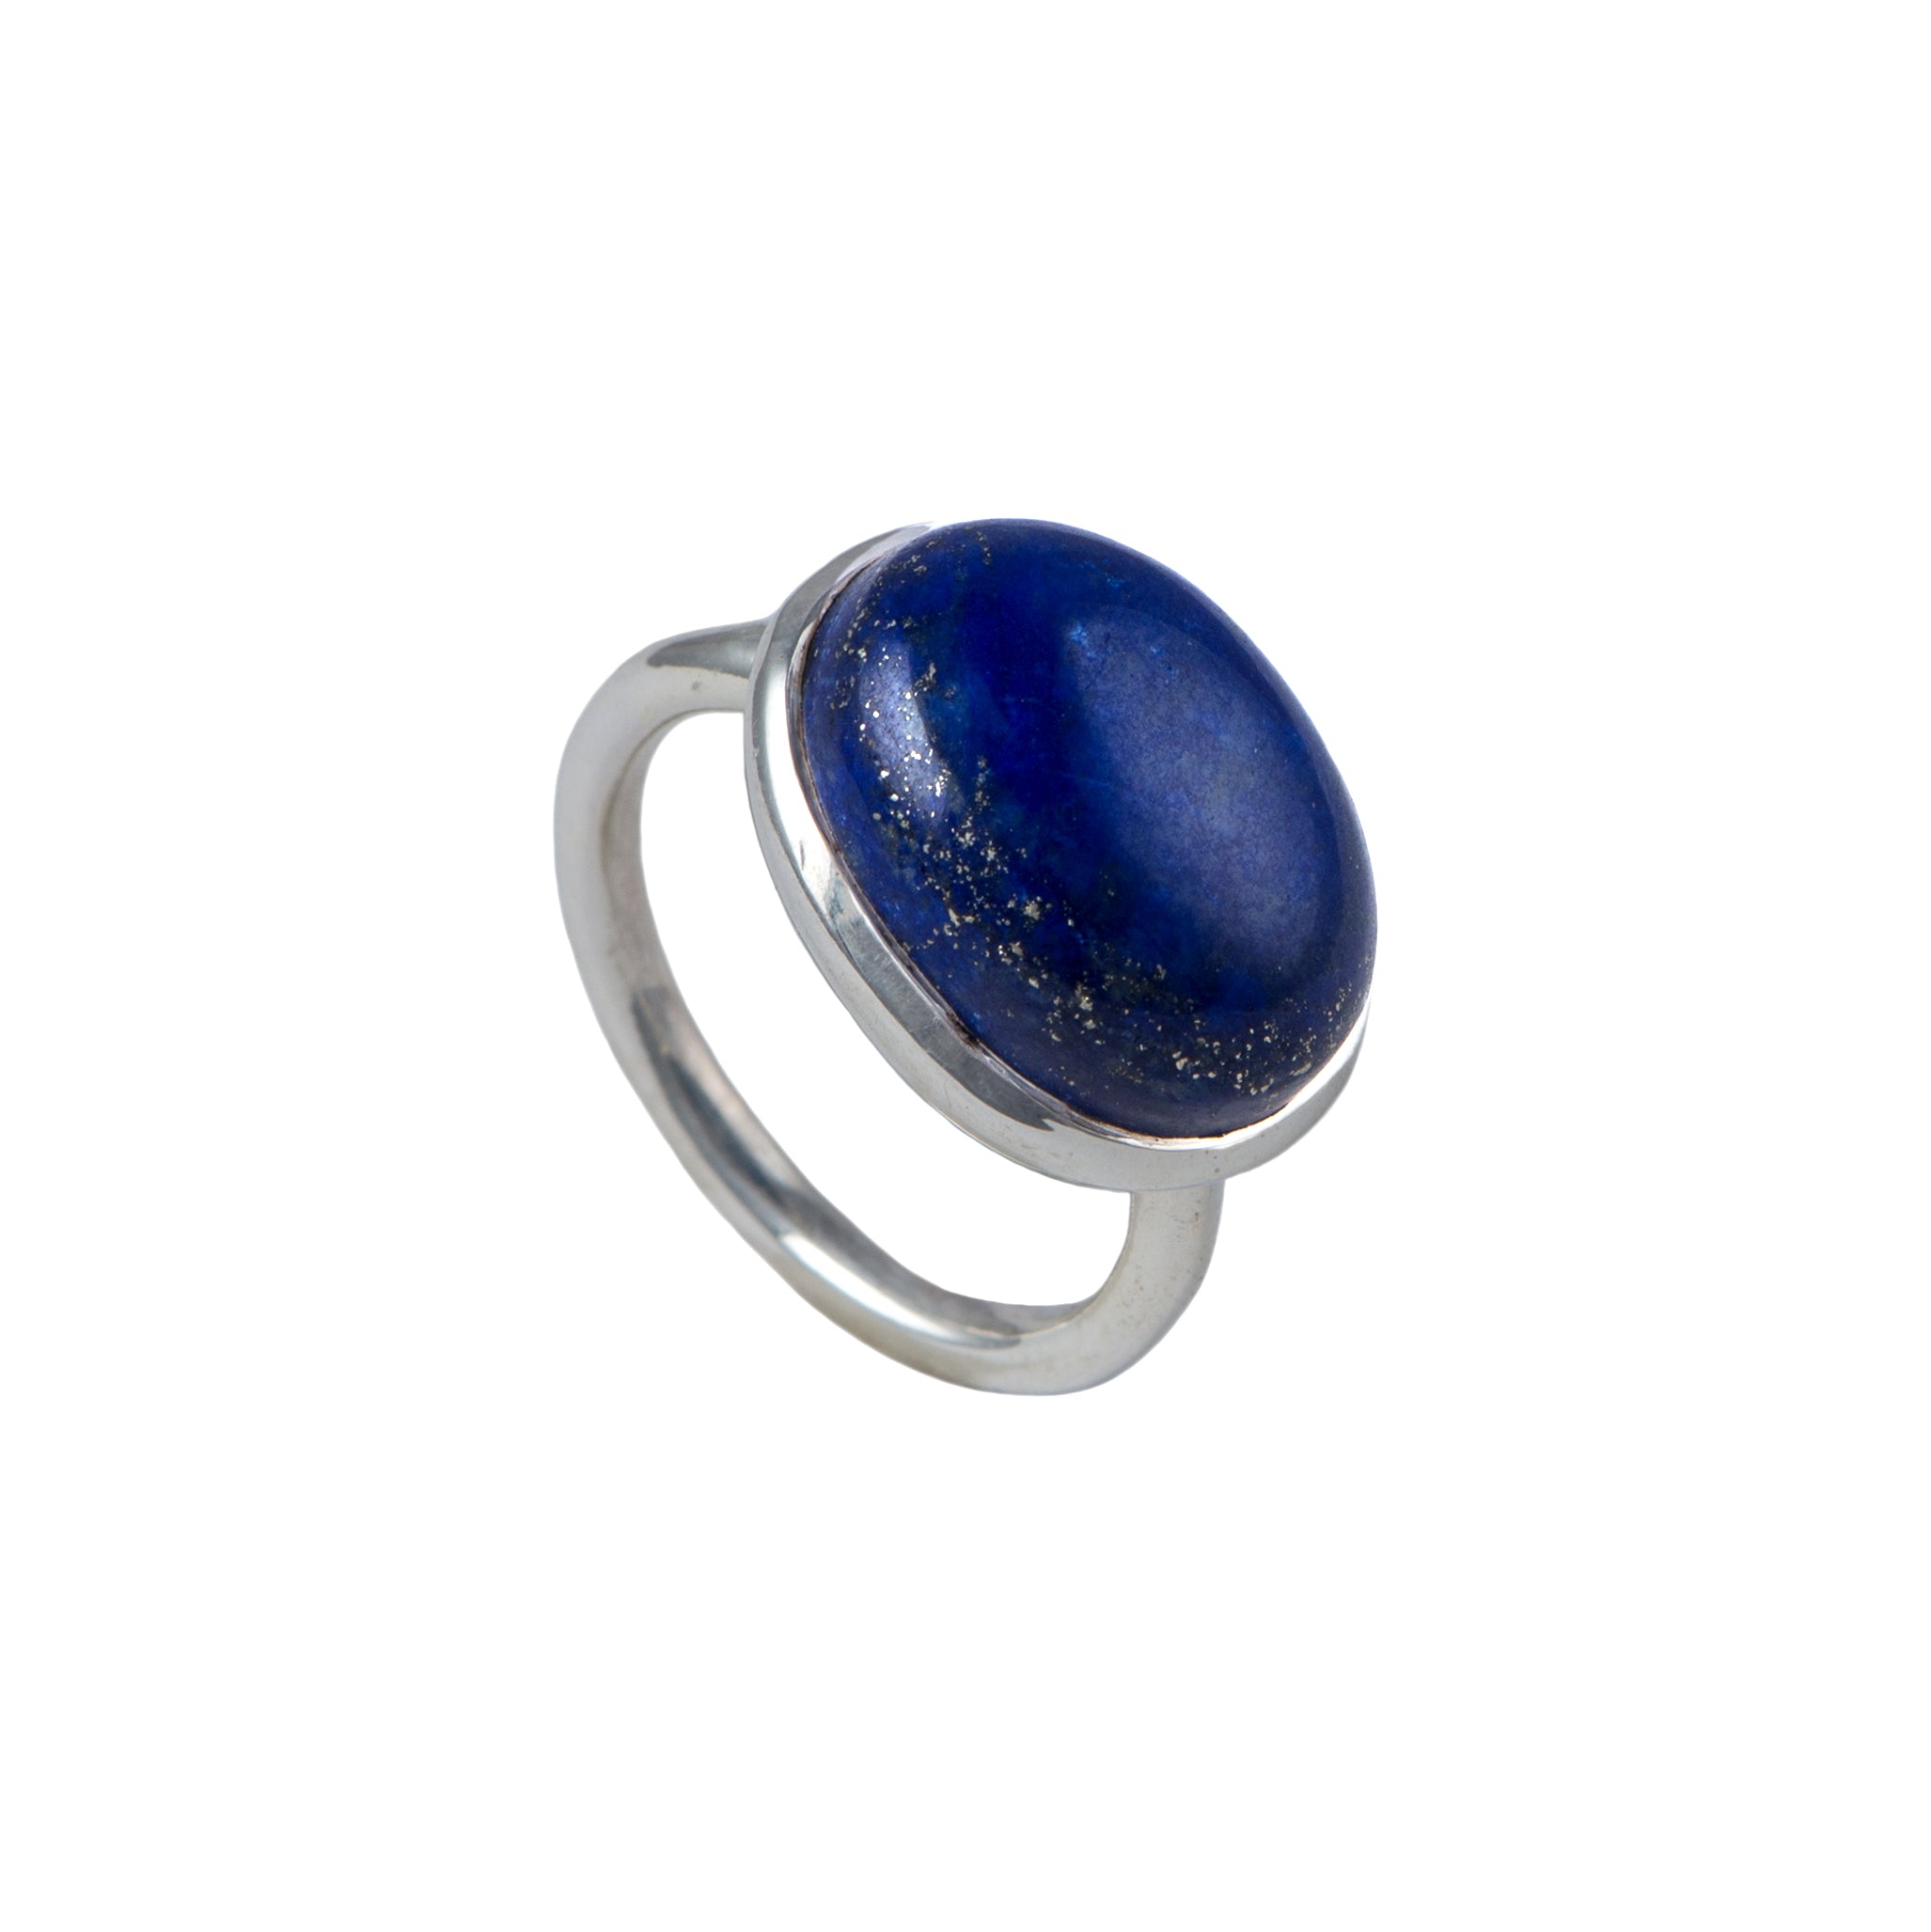 Cabochon Oval Cut Natural Gemstone Sterling Silver Ring - Lapis Lazuli